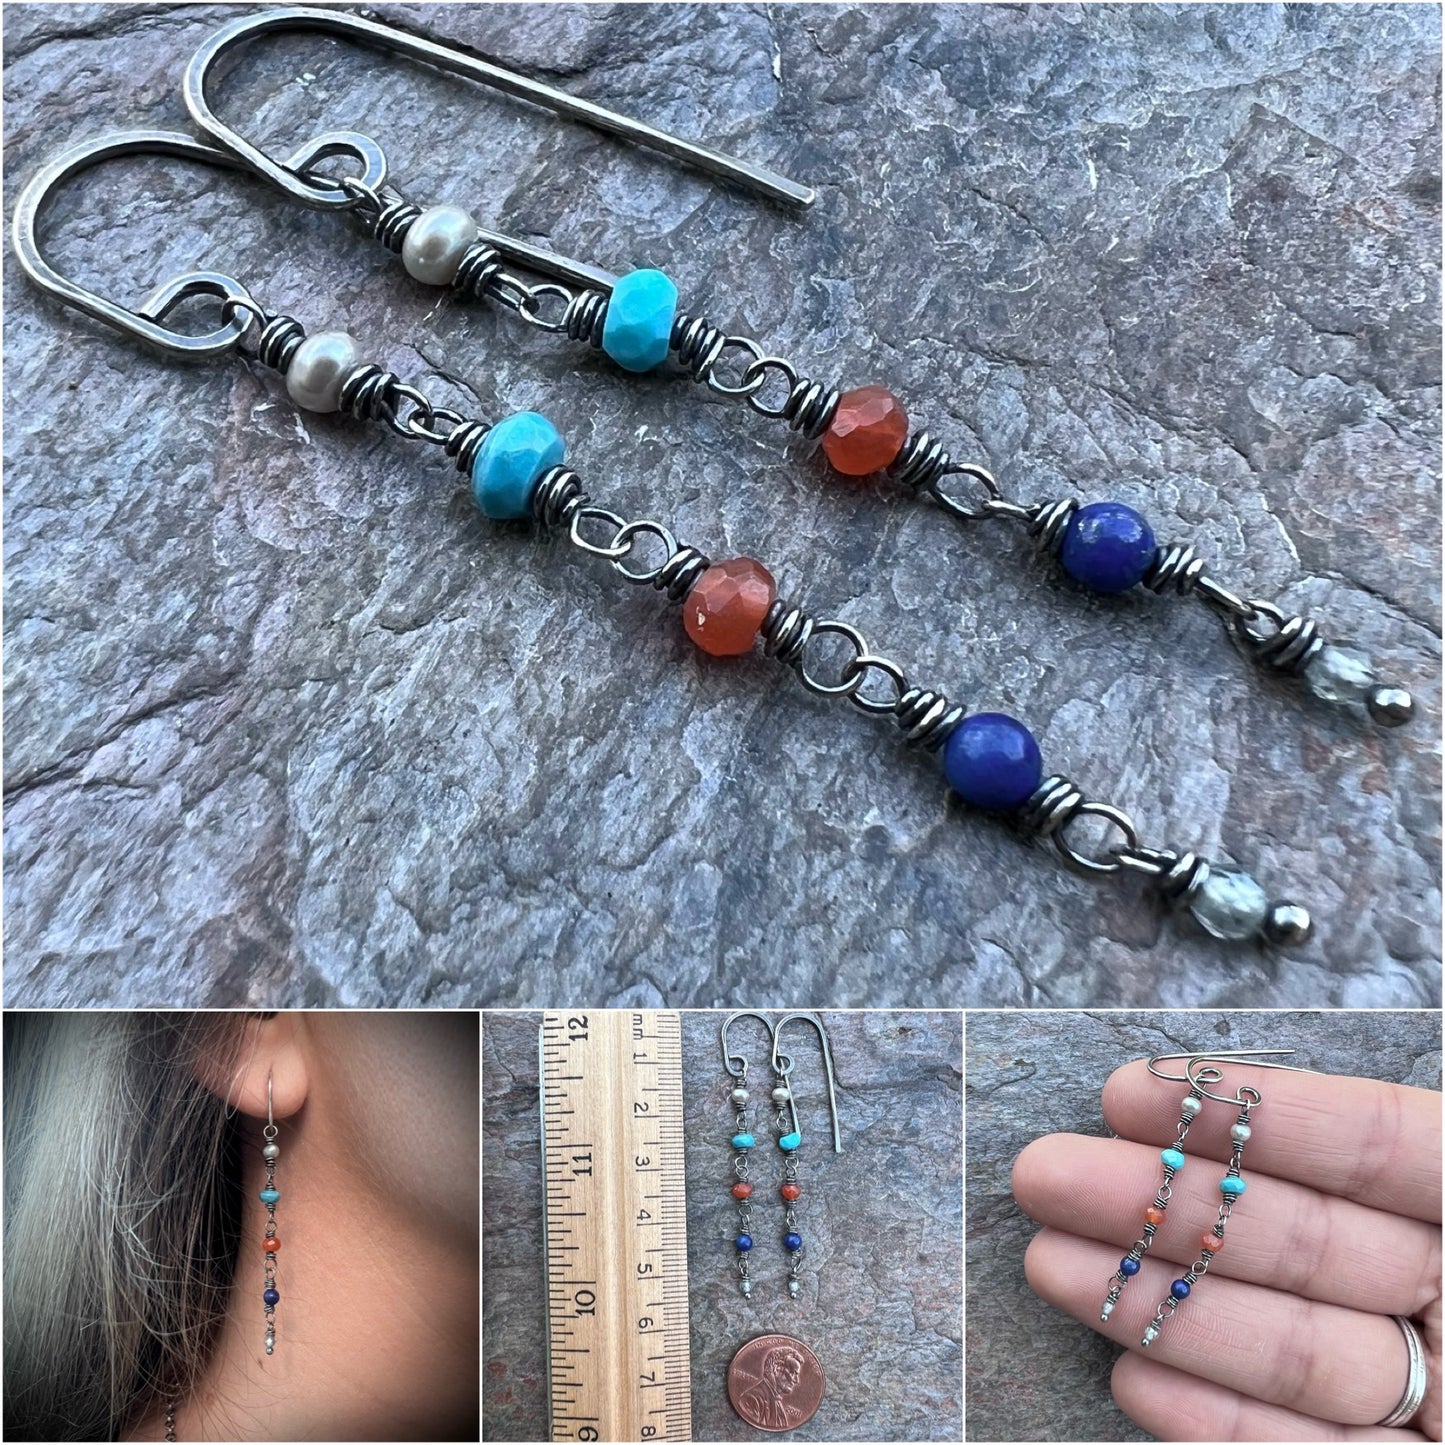 Pearl, Turquoise, Carnelian, Lapiz, and Zircon Sterling Silver and Black Pearl Earrings